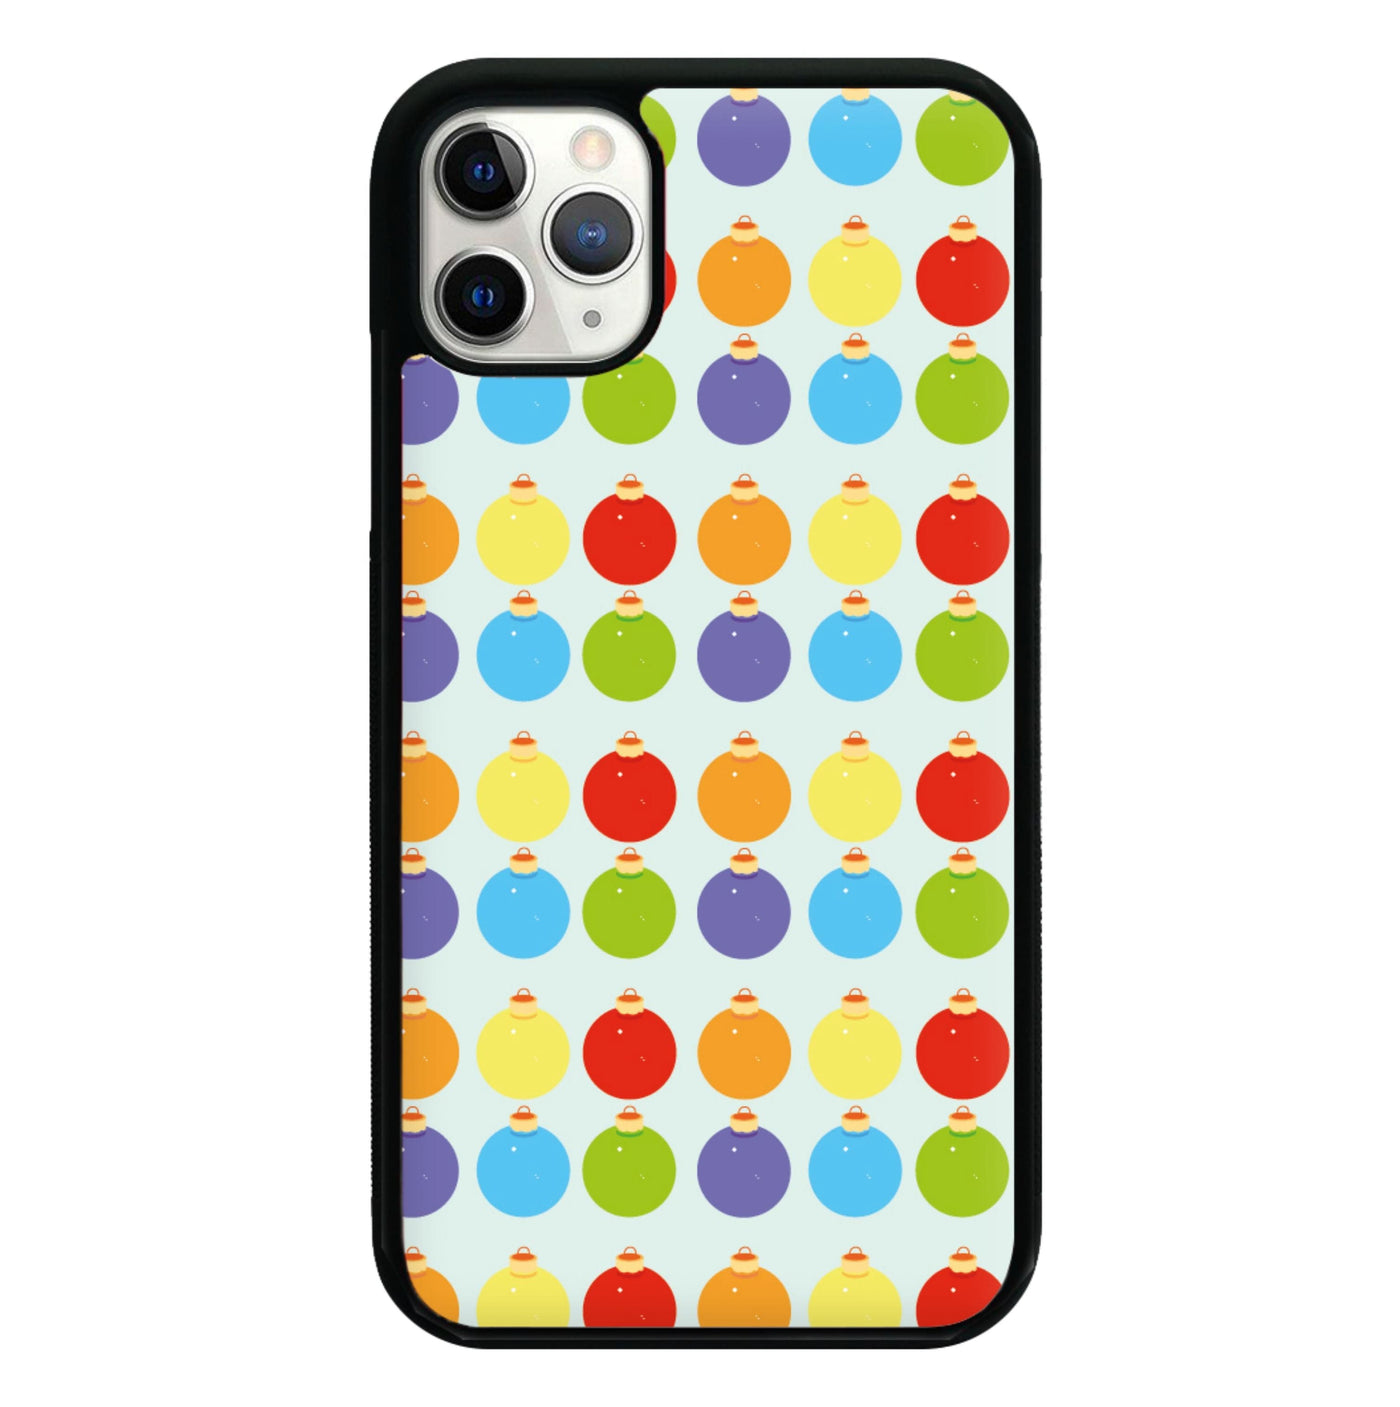 Baubles - Christmas Patterns Phone Case